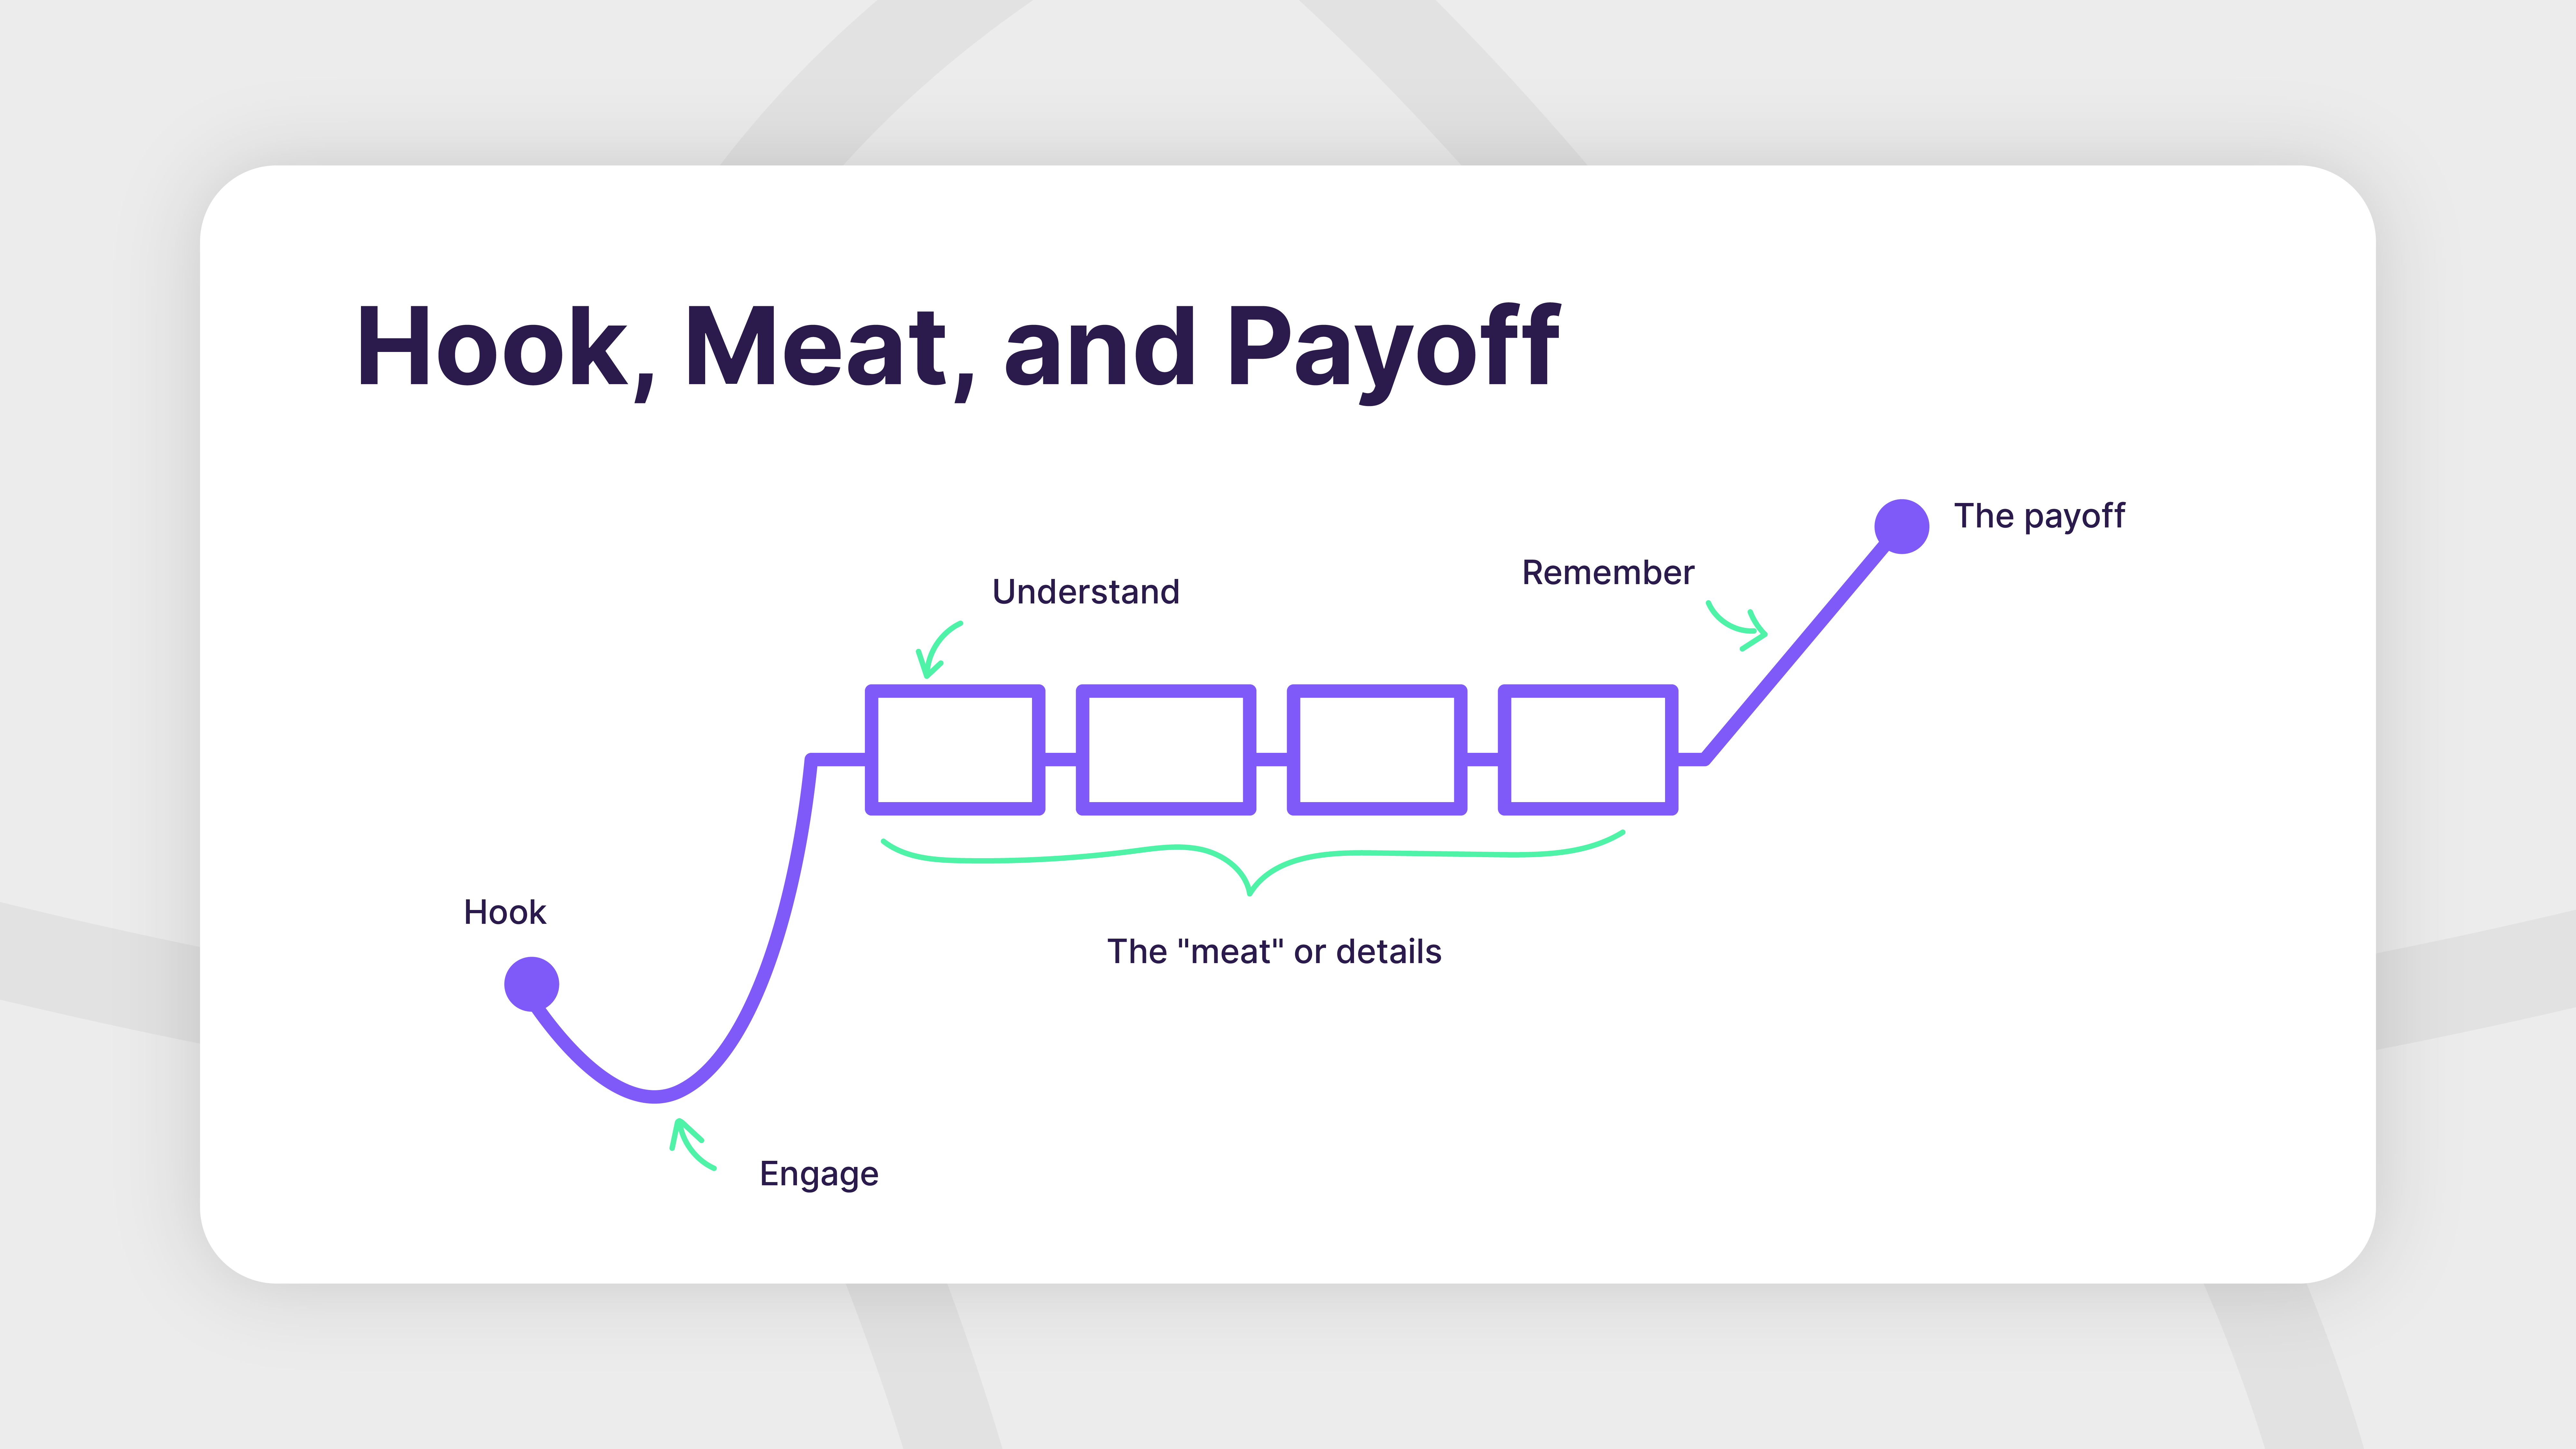 Hook, meat, and payoff presentation narrative